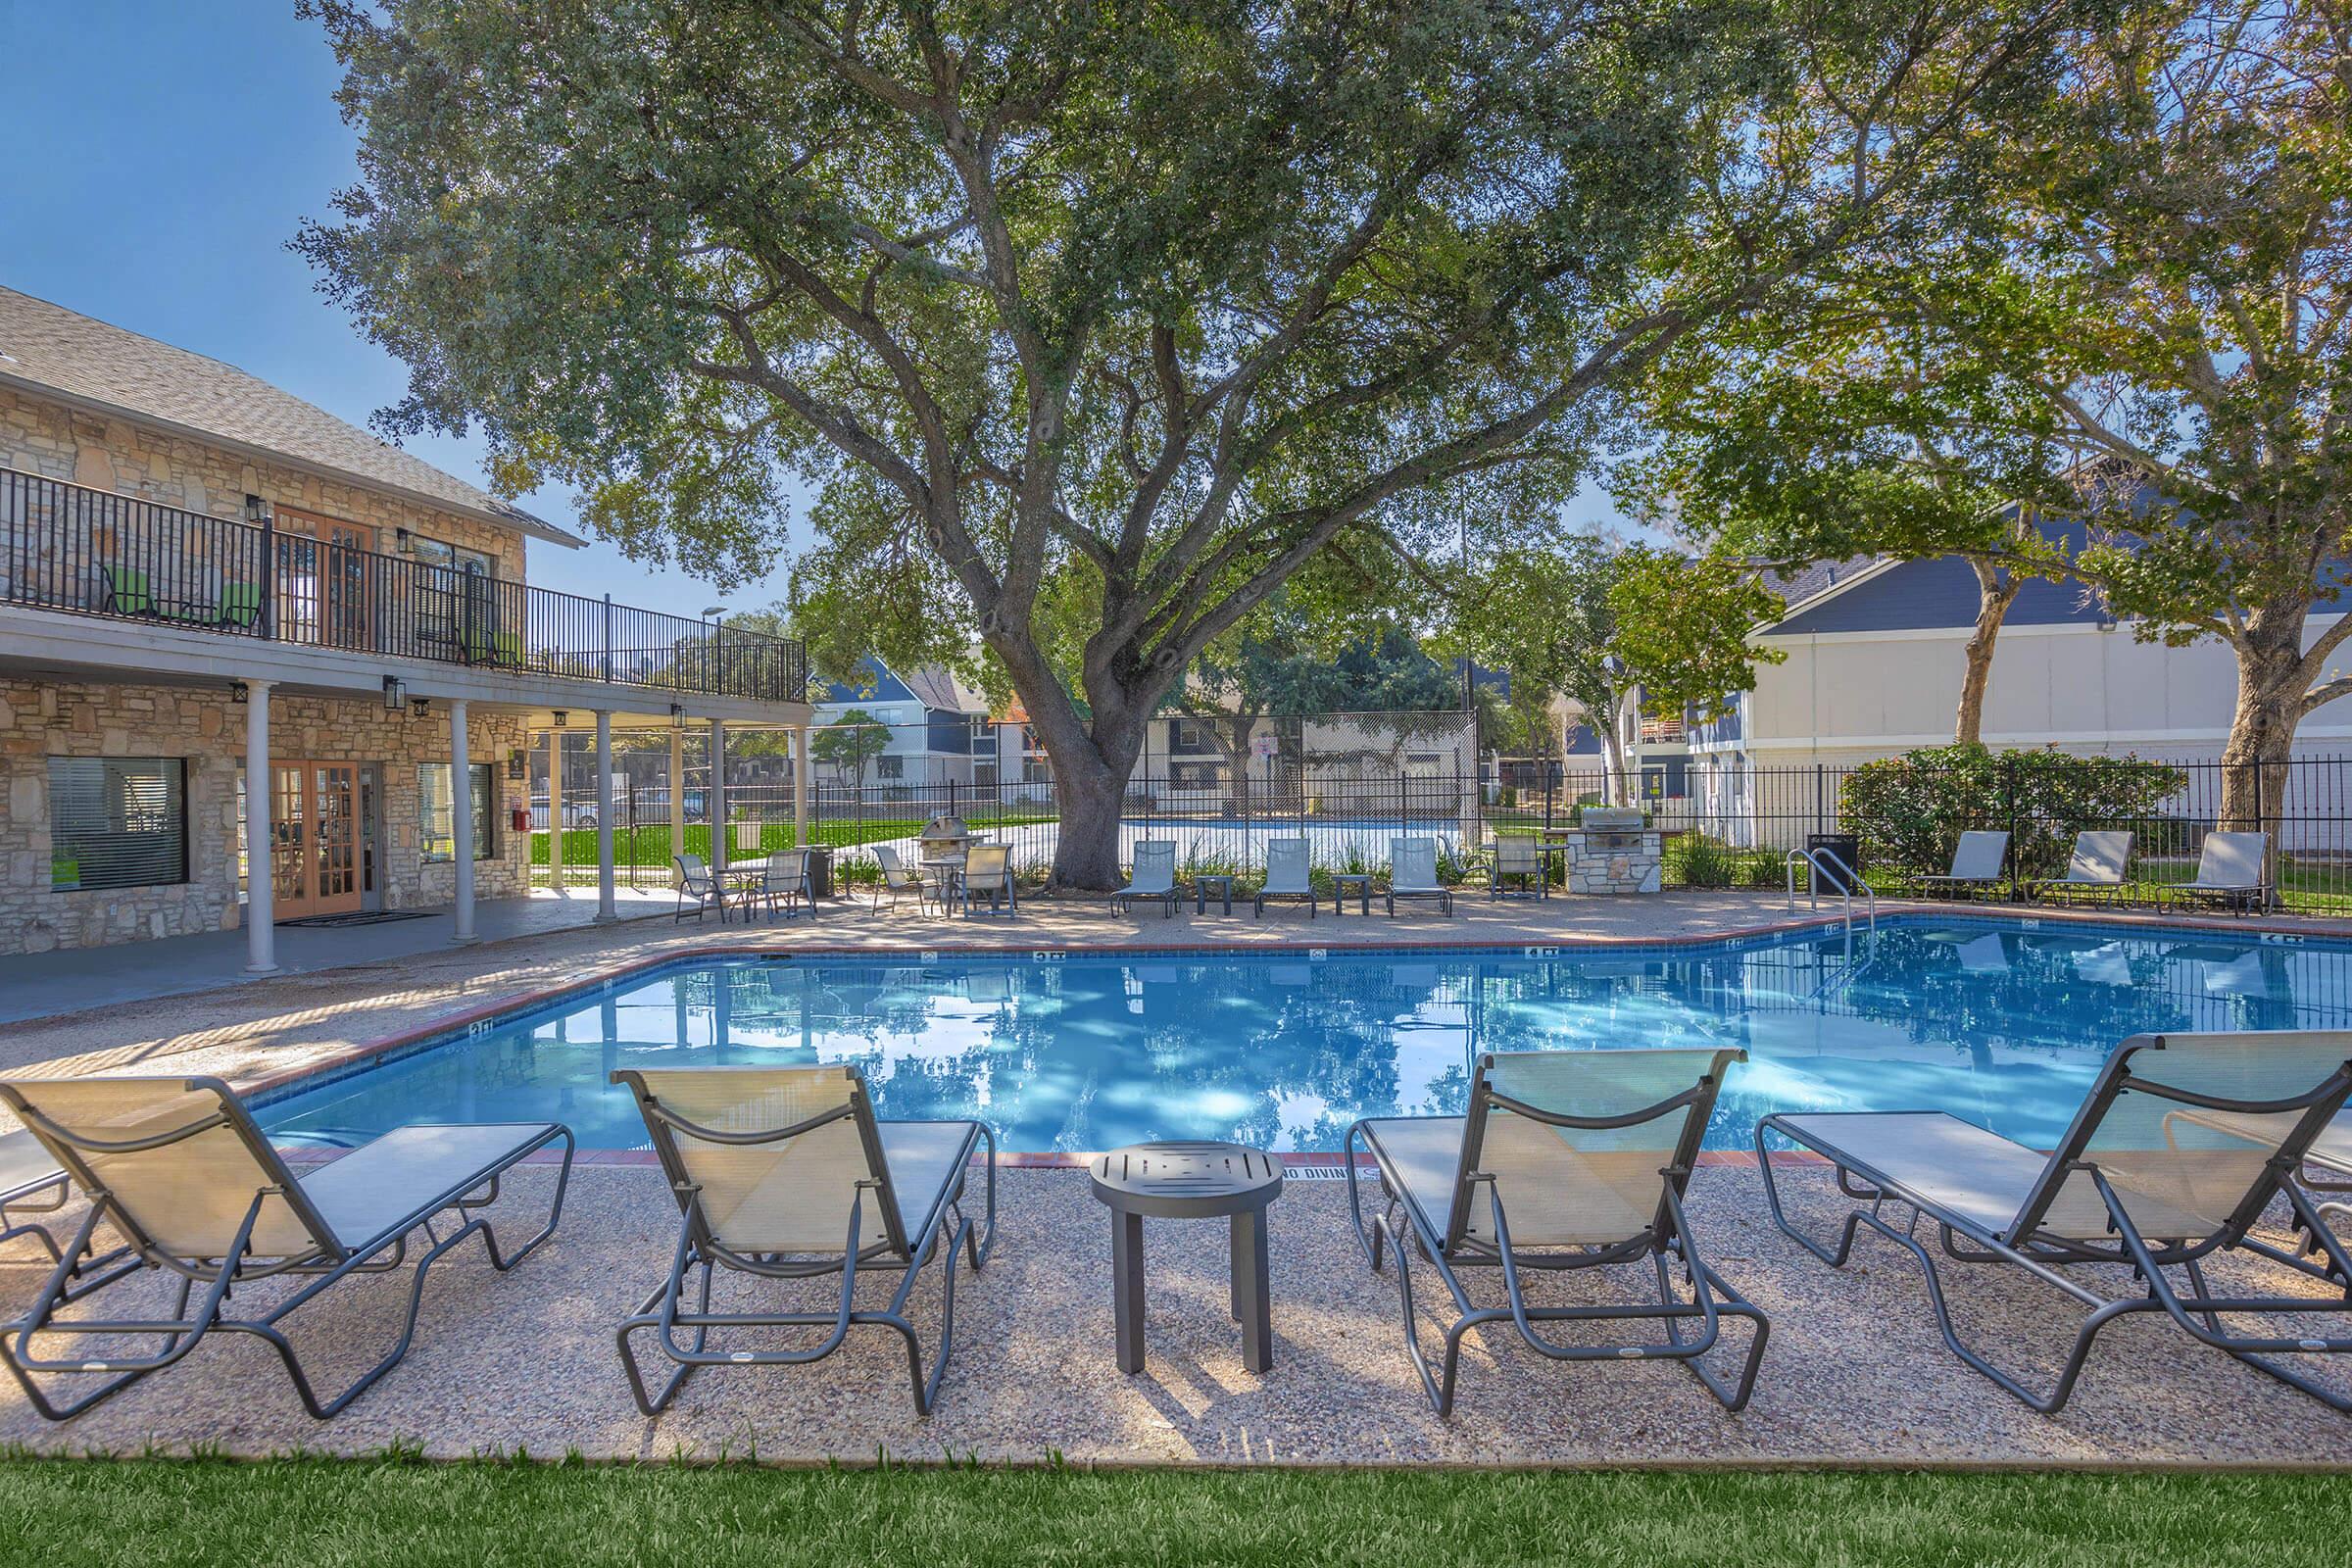 a group of lawn chairs sitting on a chair in front of a pool